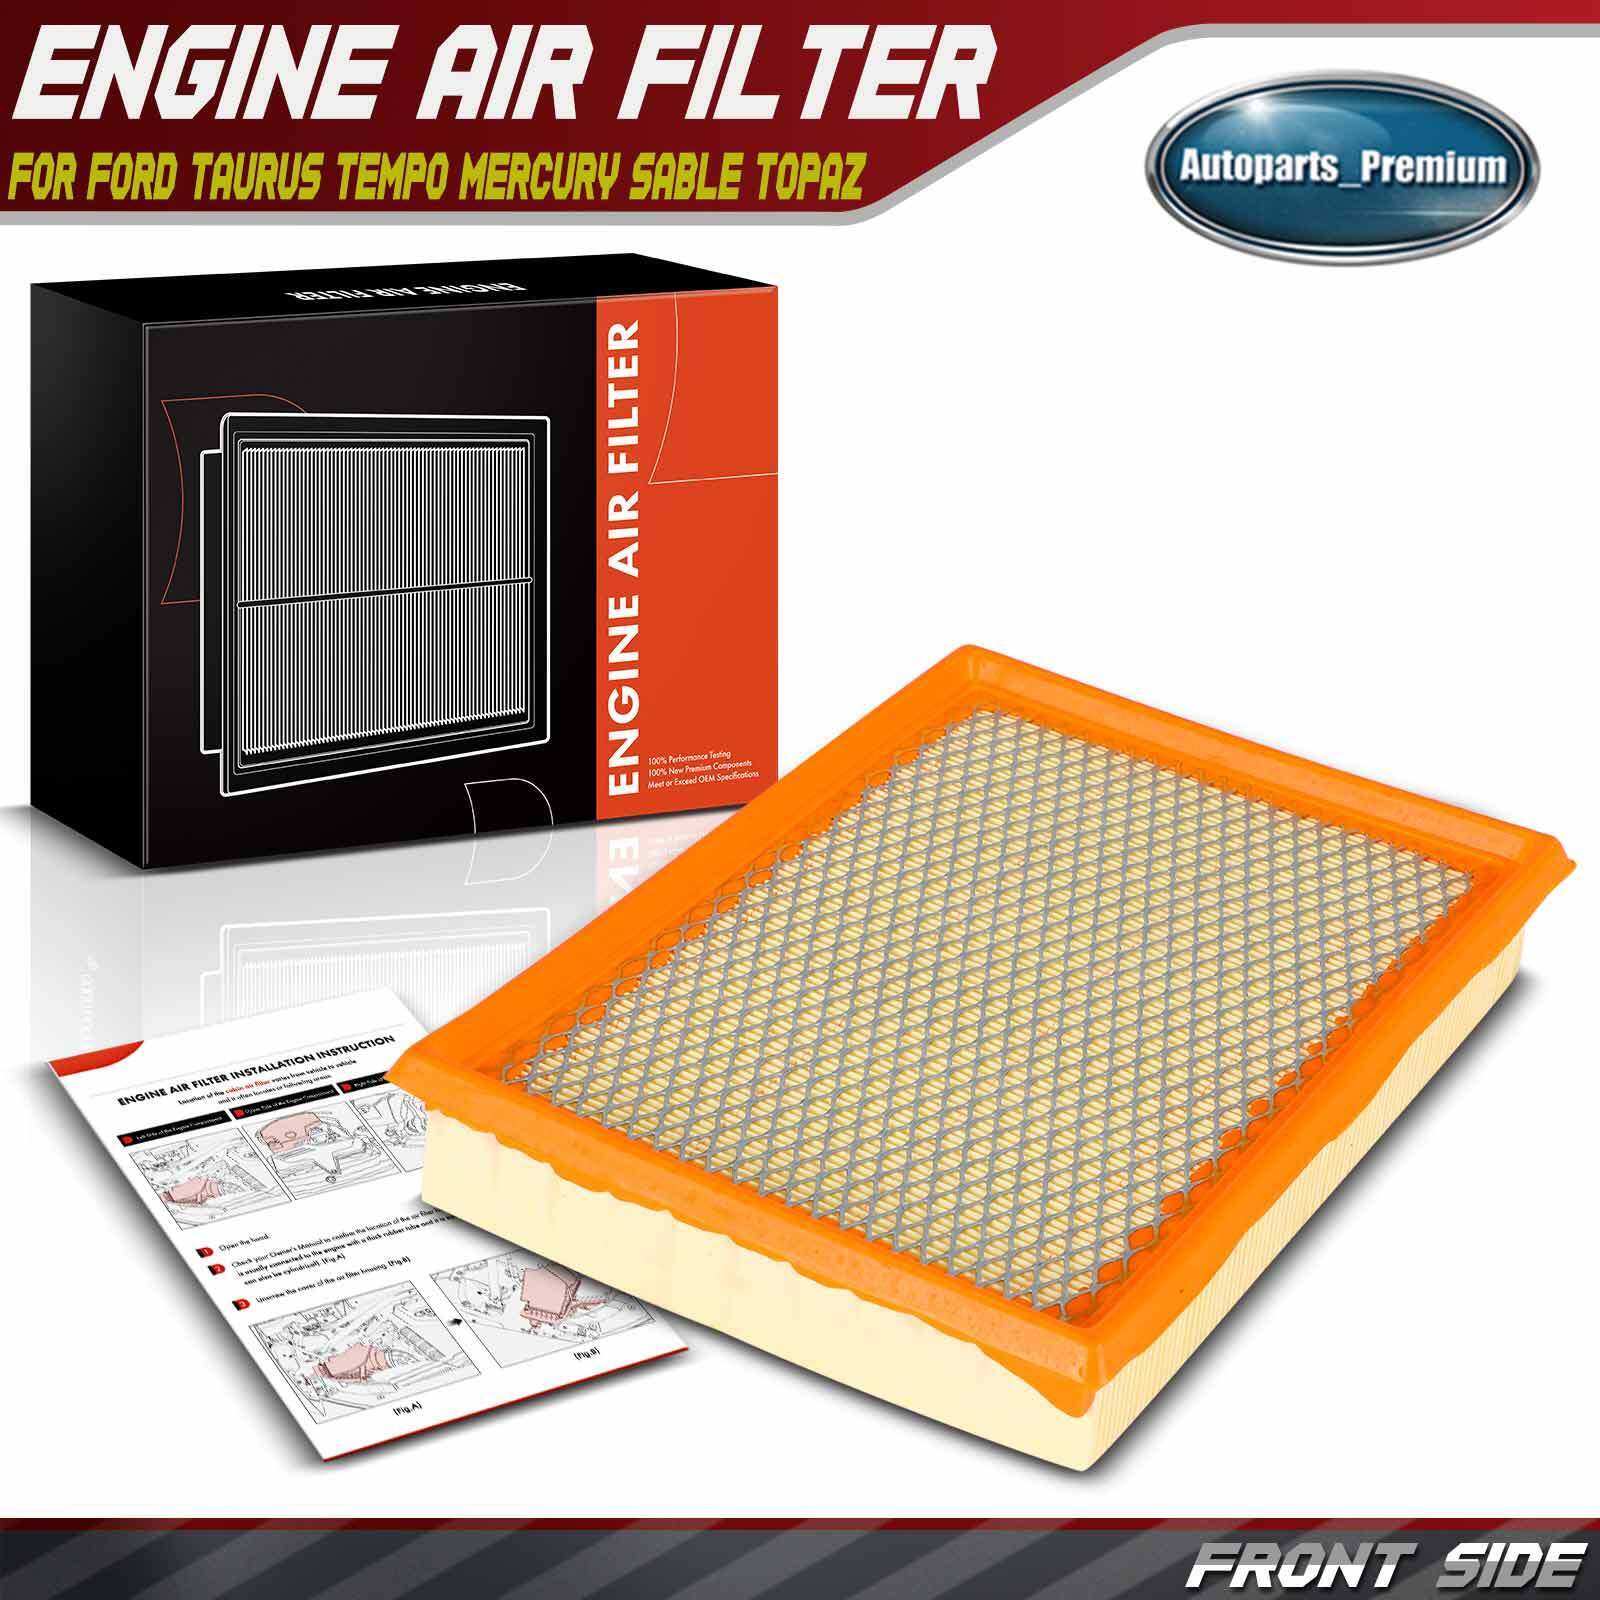 Engine Air Filter for Ford Taurus 1996-1999 Tempo 1992-1994 Mercury Sable Topaz